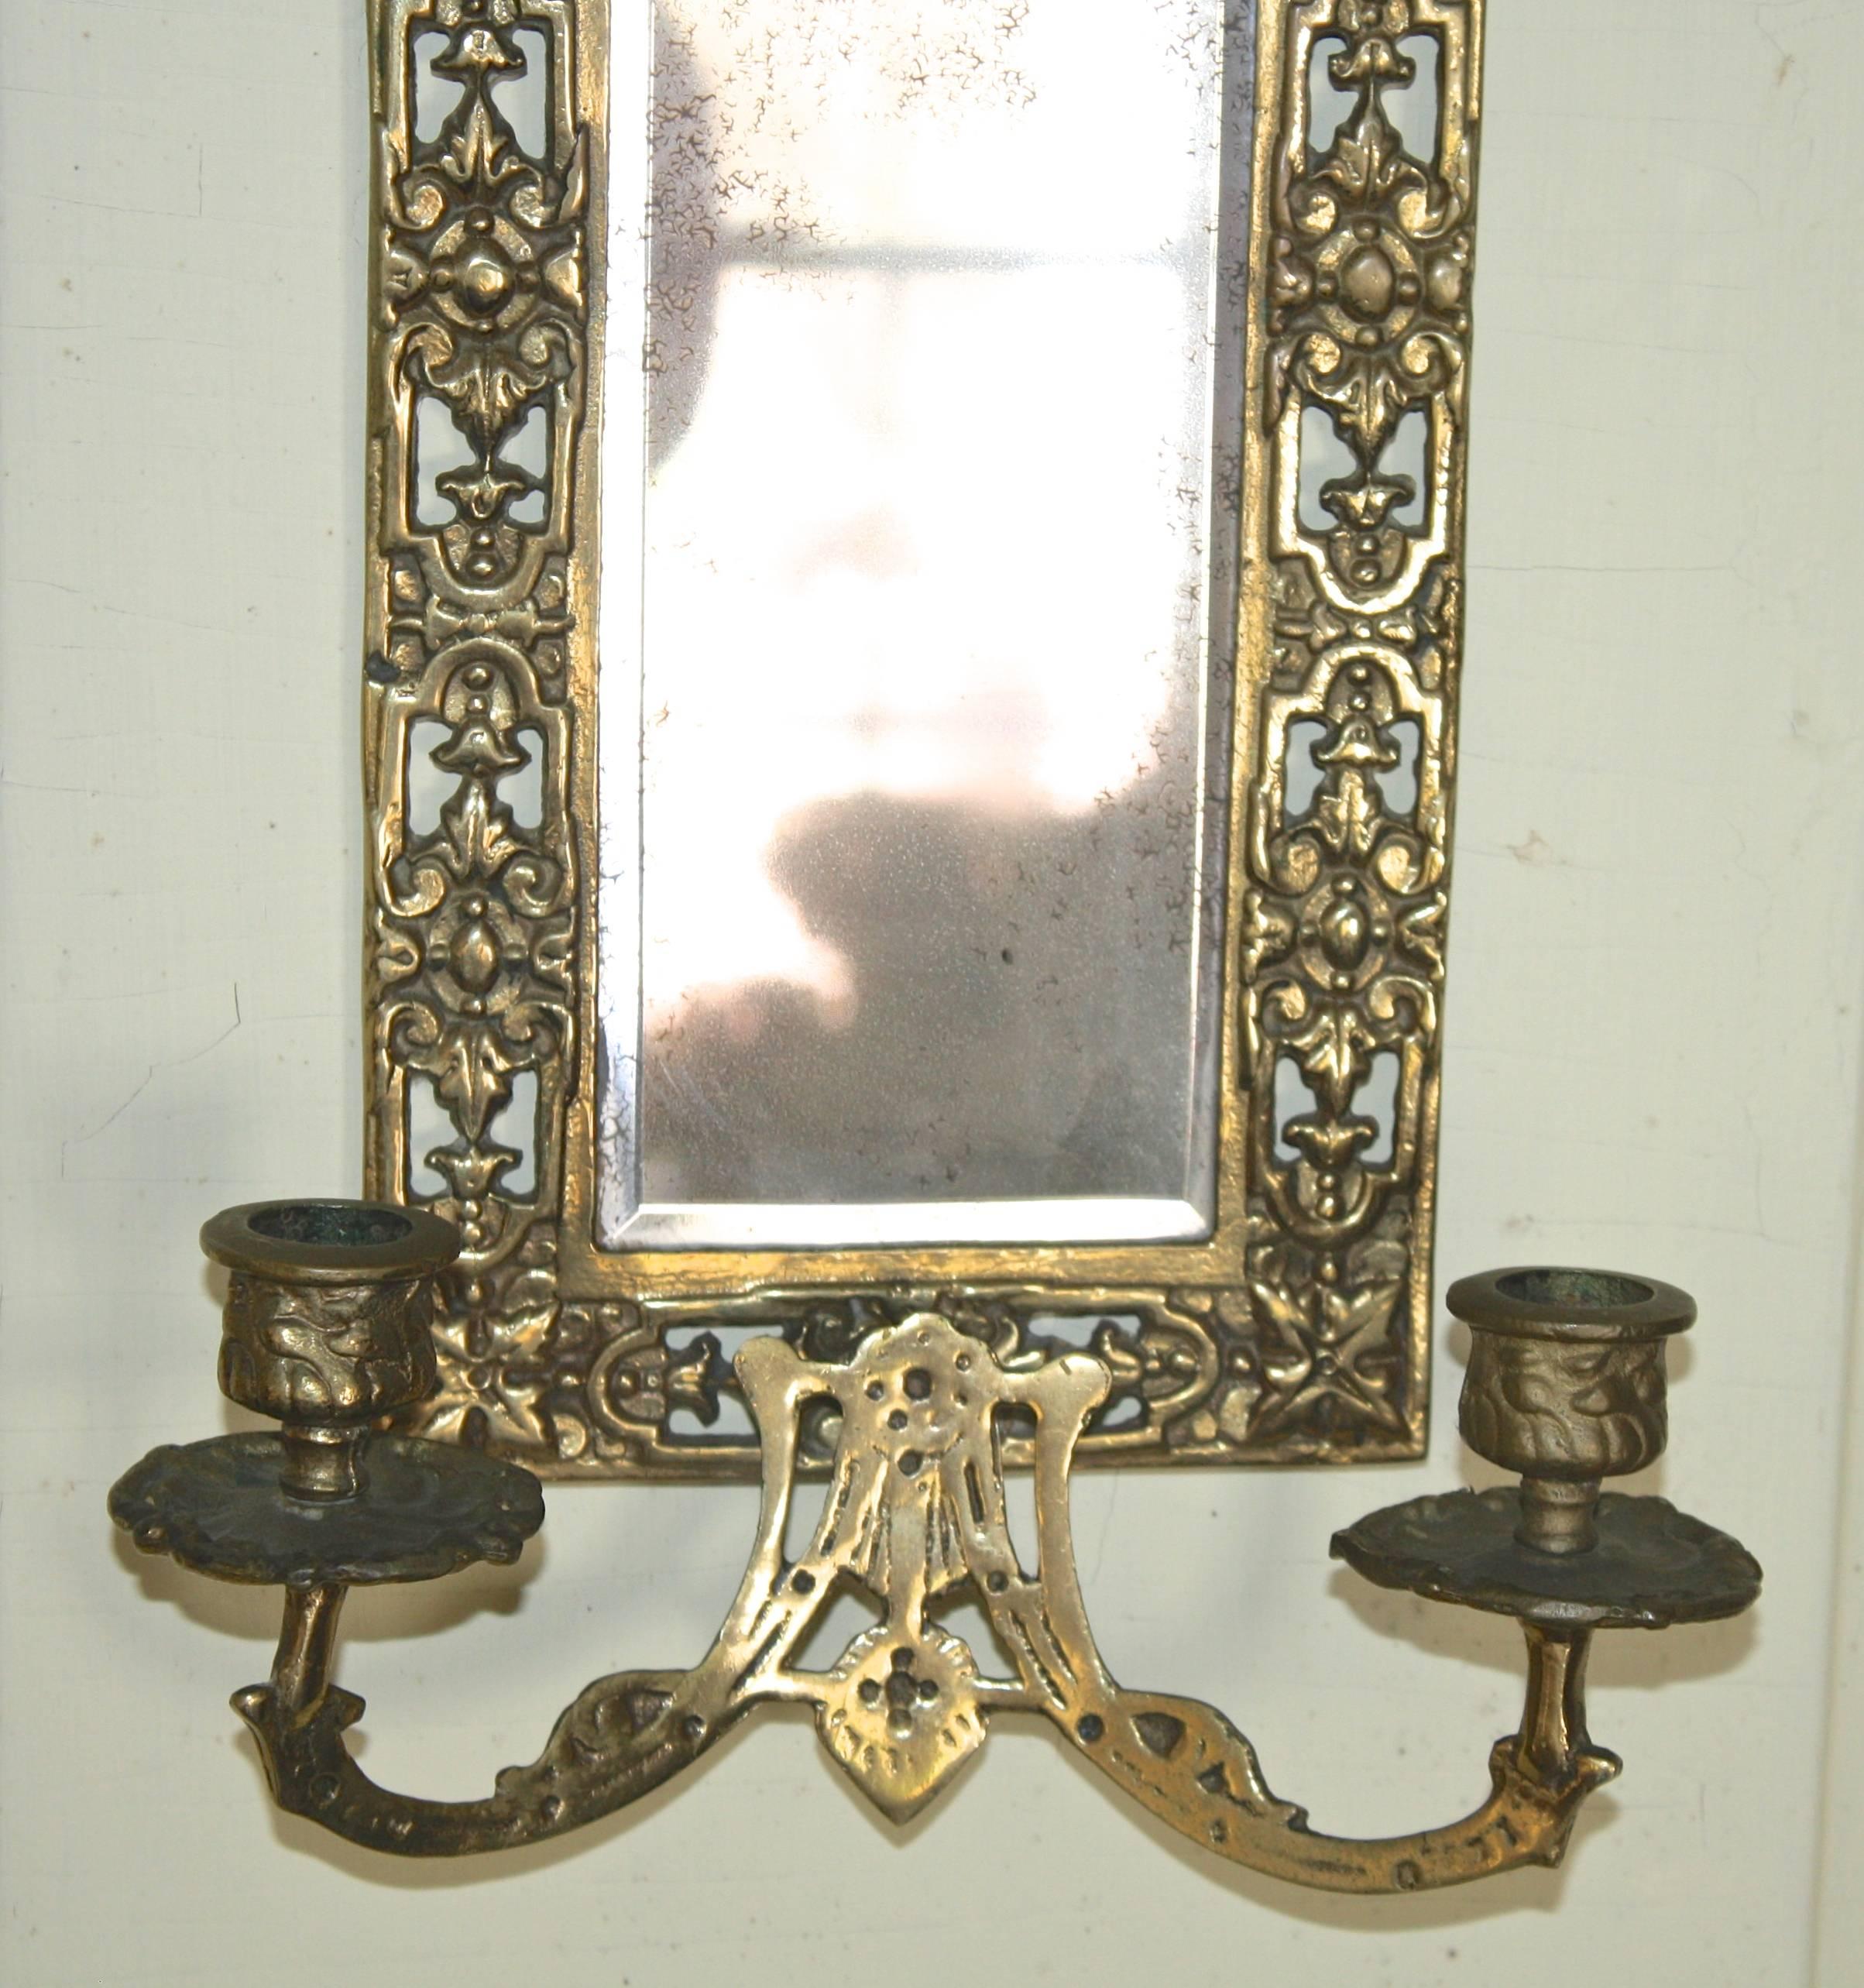 Neoclassical Revival PAIR Neoclassical Brass Mirrored Candle Sconces For Sale